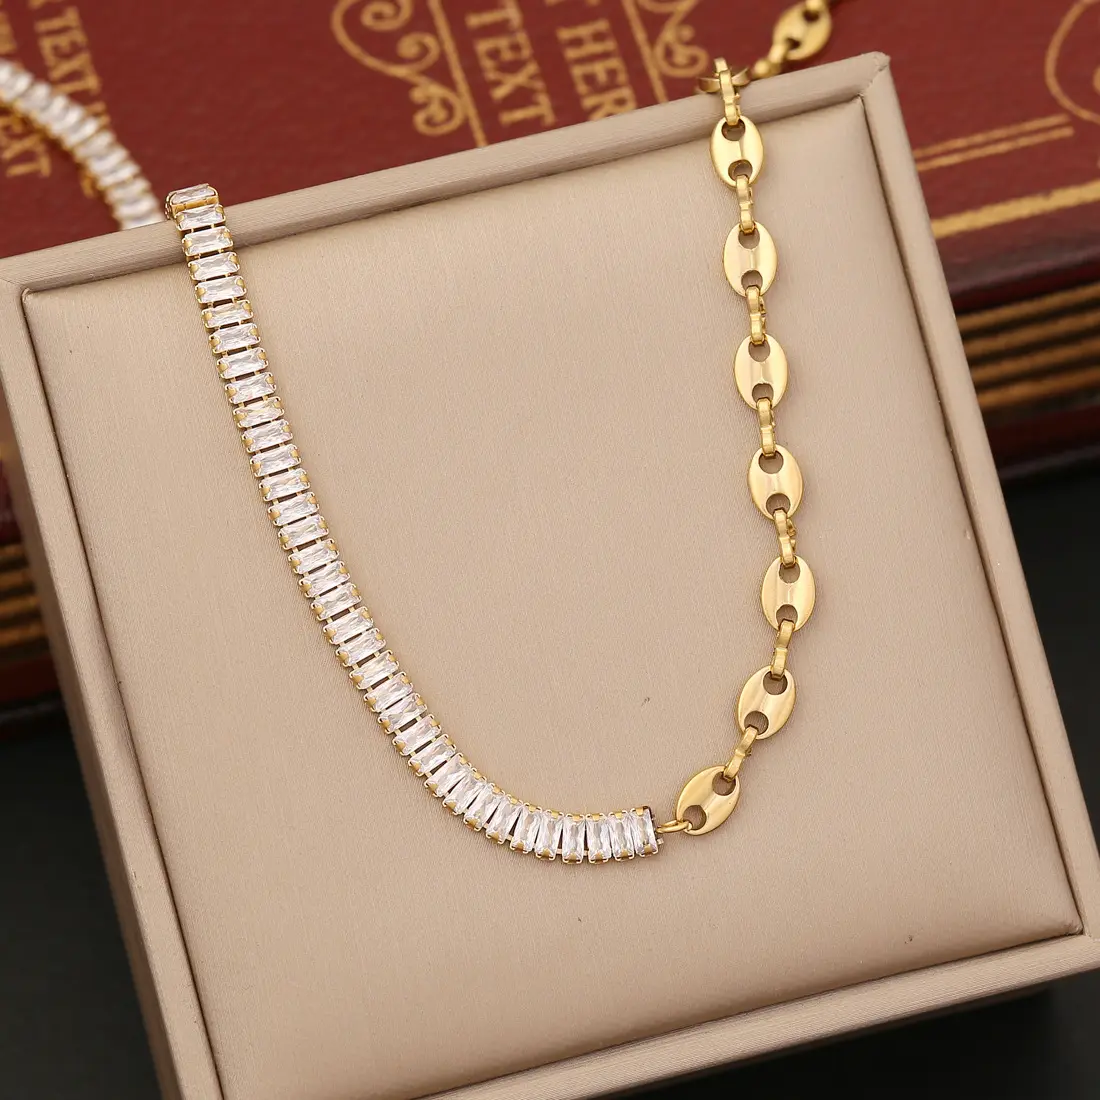 Hot selling crystal zircon necklace with stainless steel square pig nose design pendant necklace for fashionable women